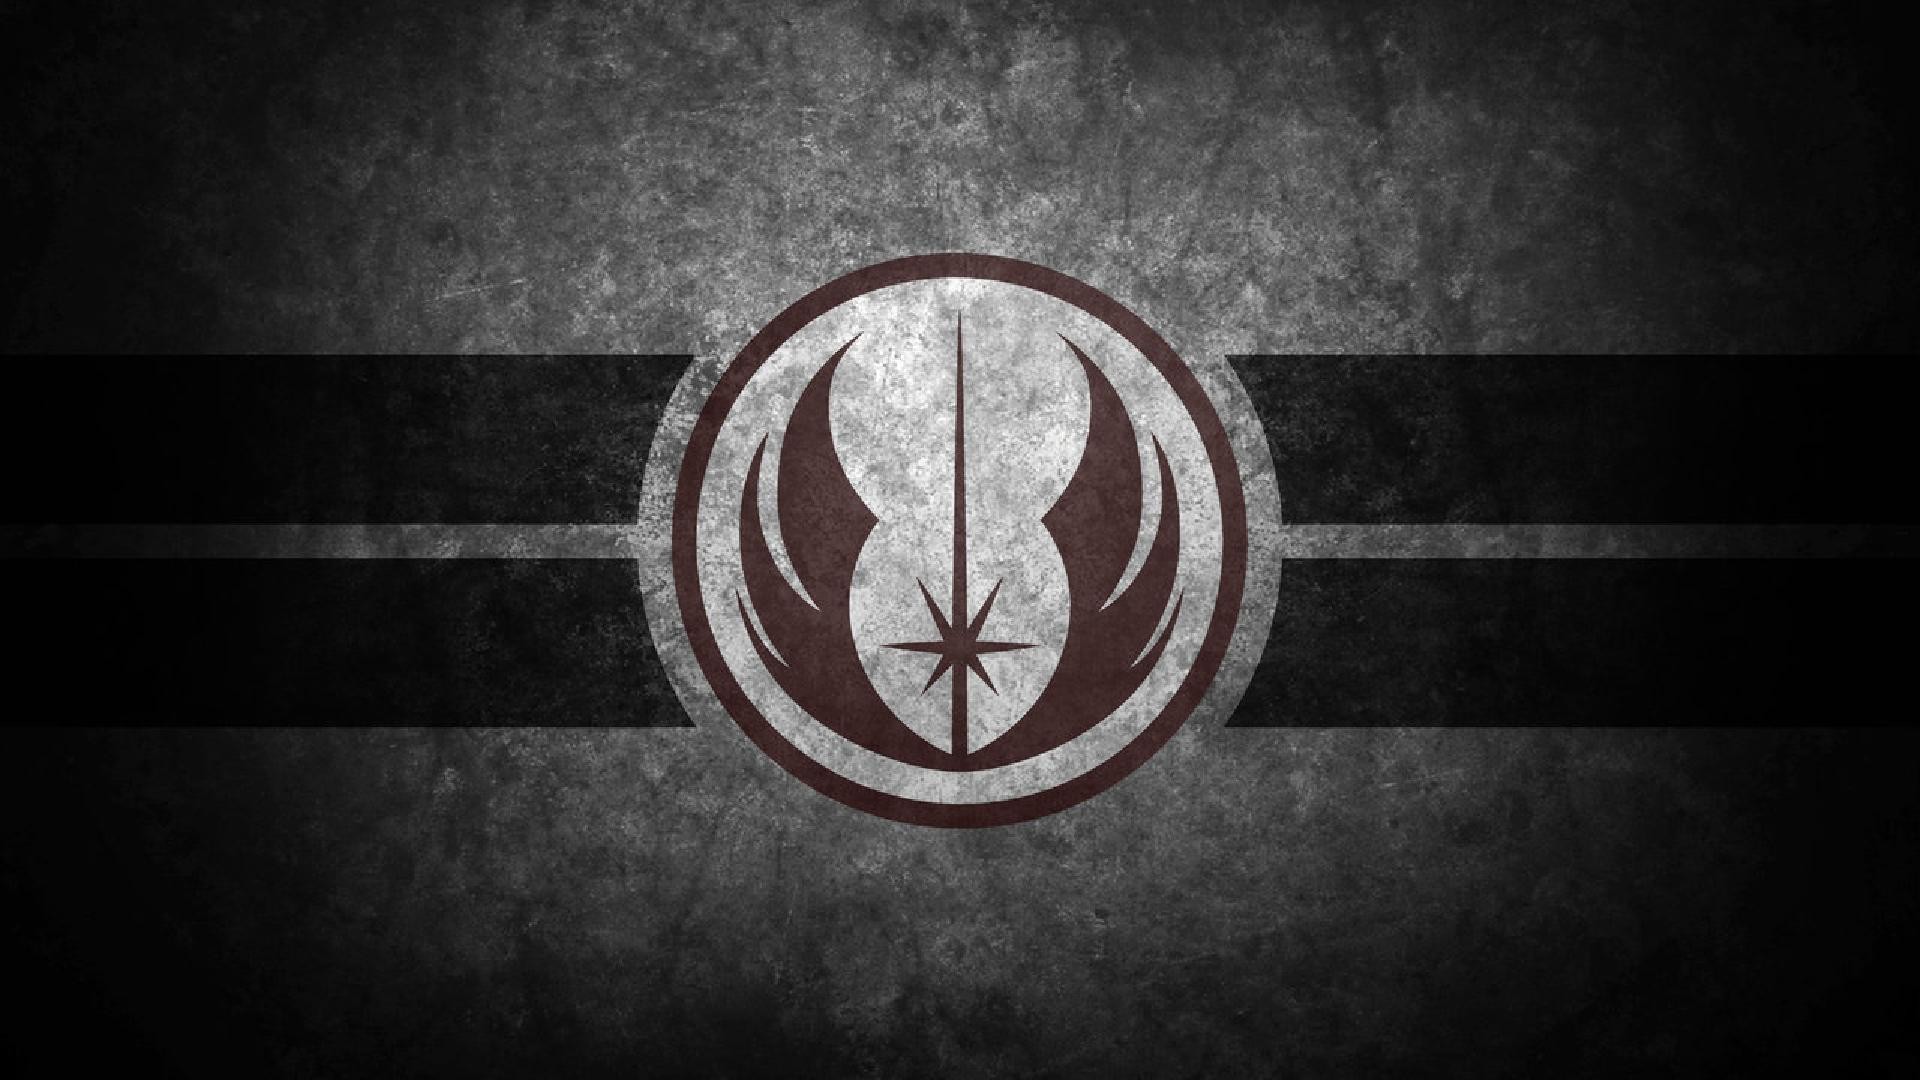 1920x1080 The Jedi Order, later known as the Old Jedi Order and referred to as the  Holy Order of the Jedi Knights, was an ancient monastic peacekeeping  organization ...